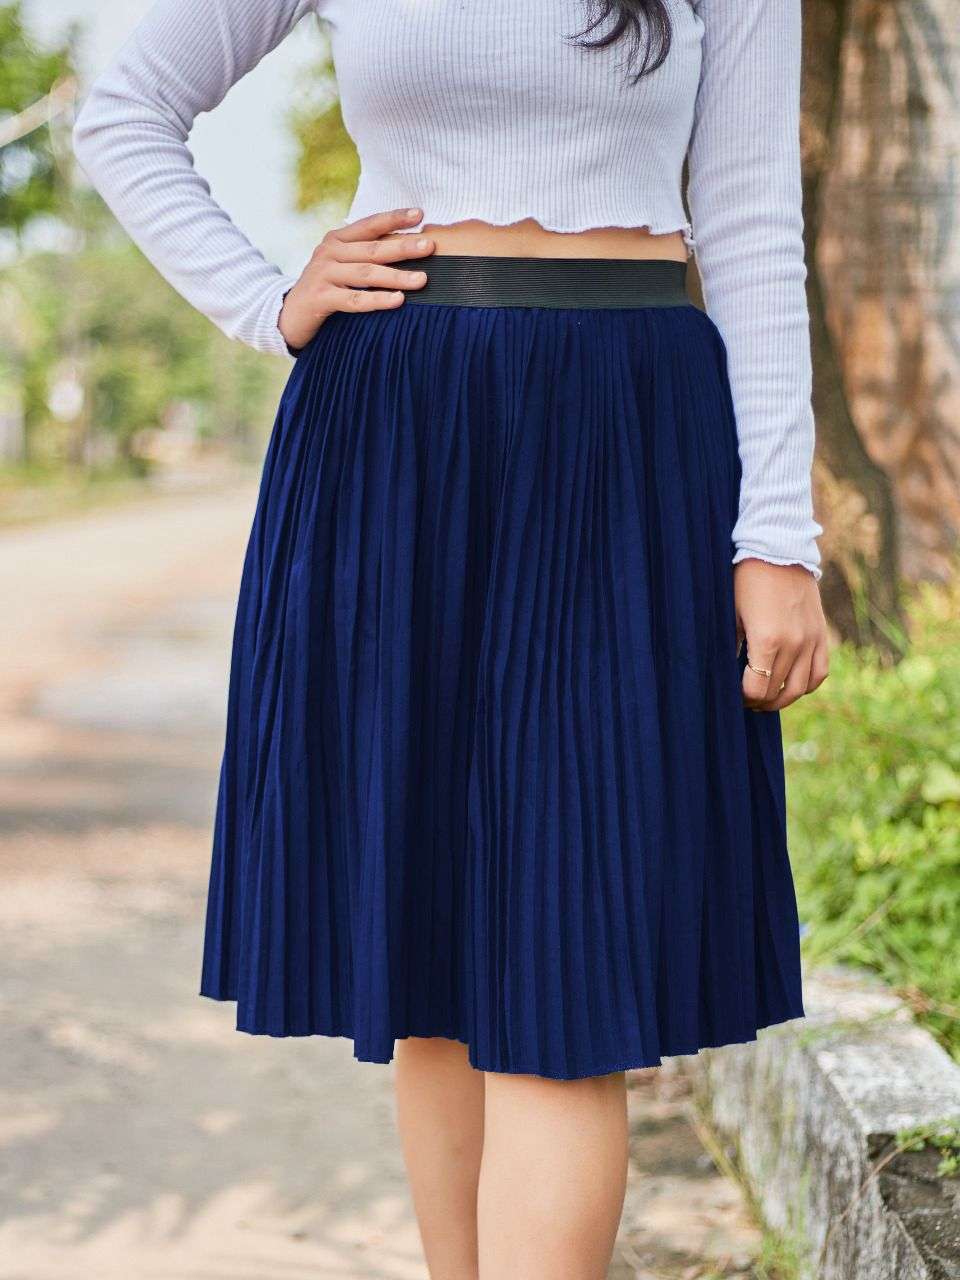 skirt short party wear pleated skirt in 4 colours fabric heavy crepe pleated pattern size free size  26 to 32 waist skirt 